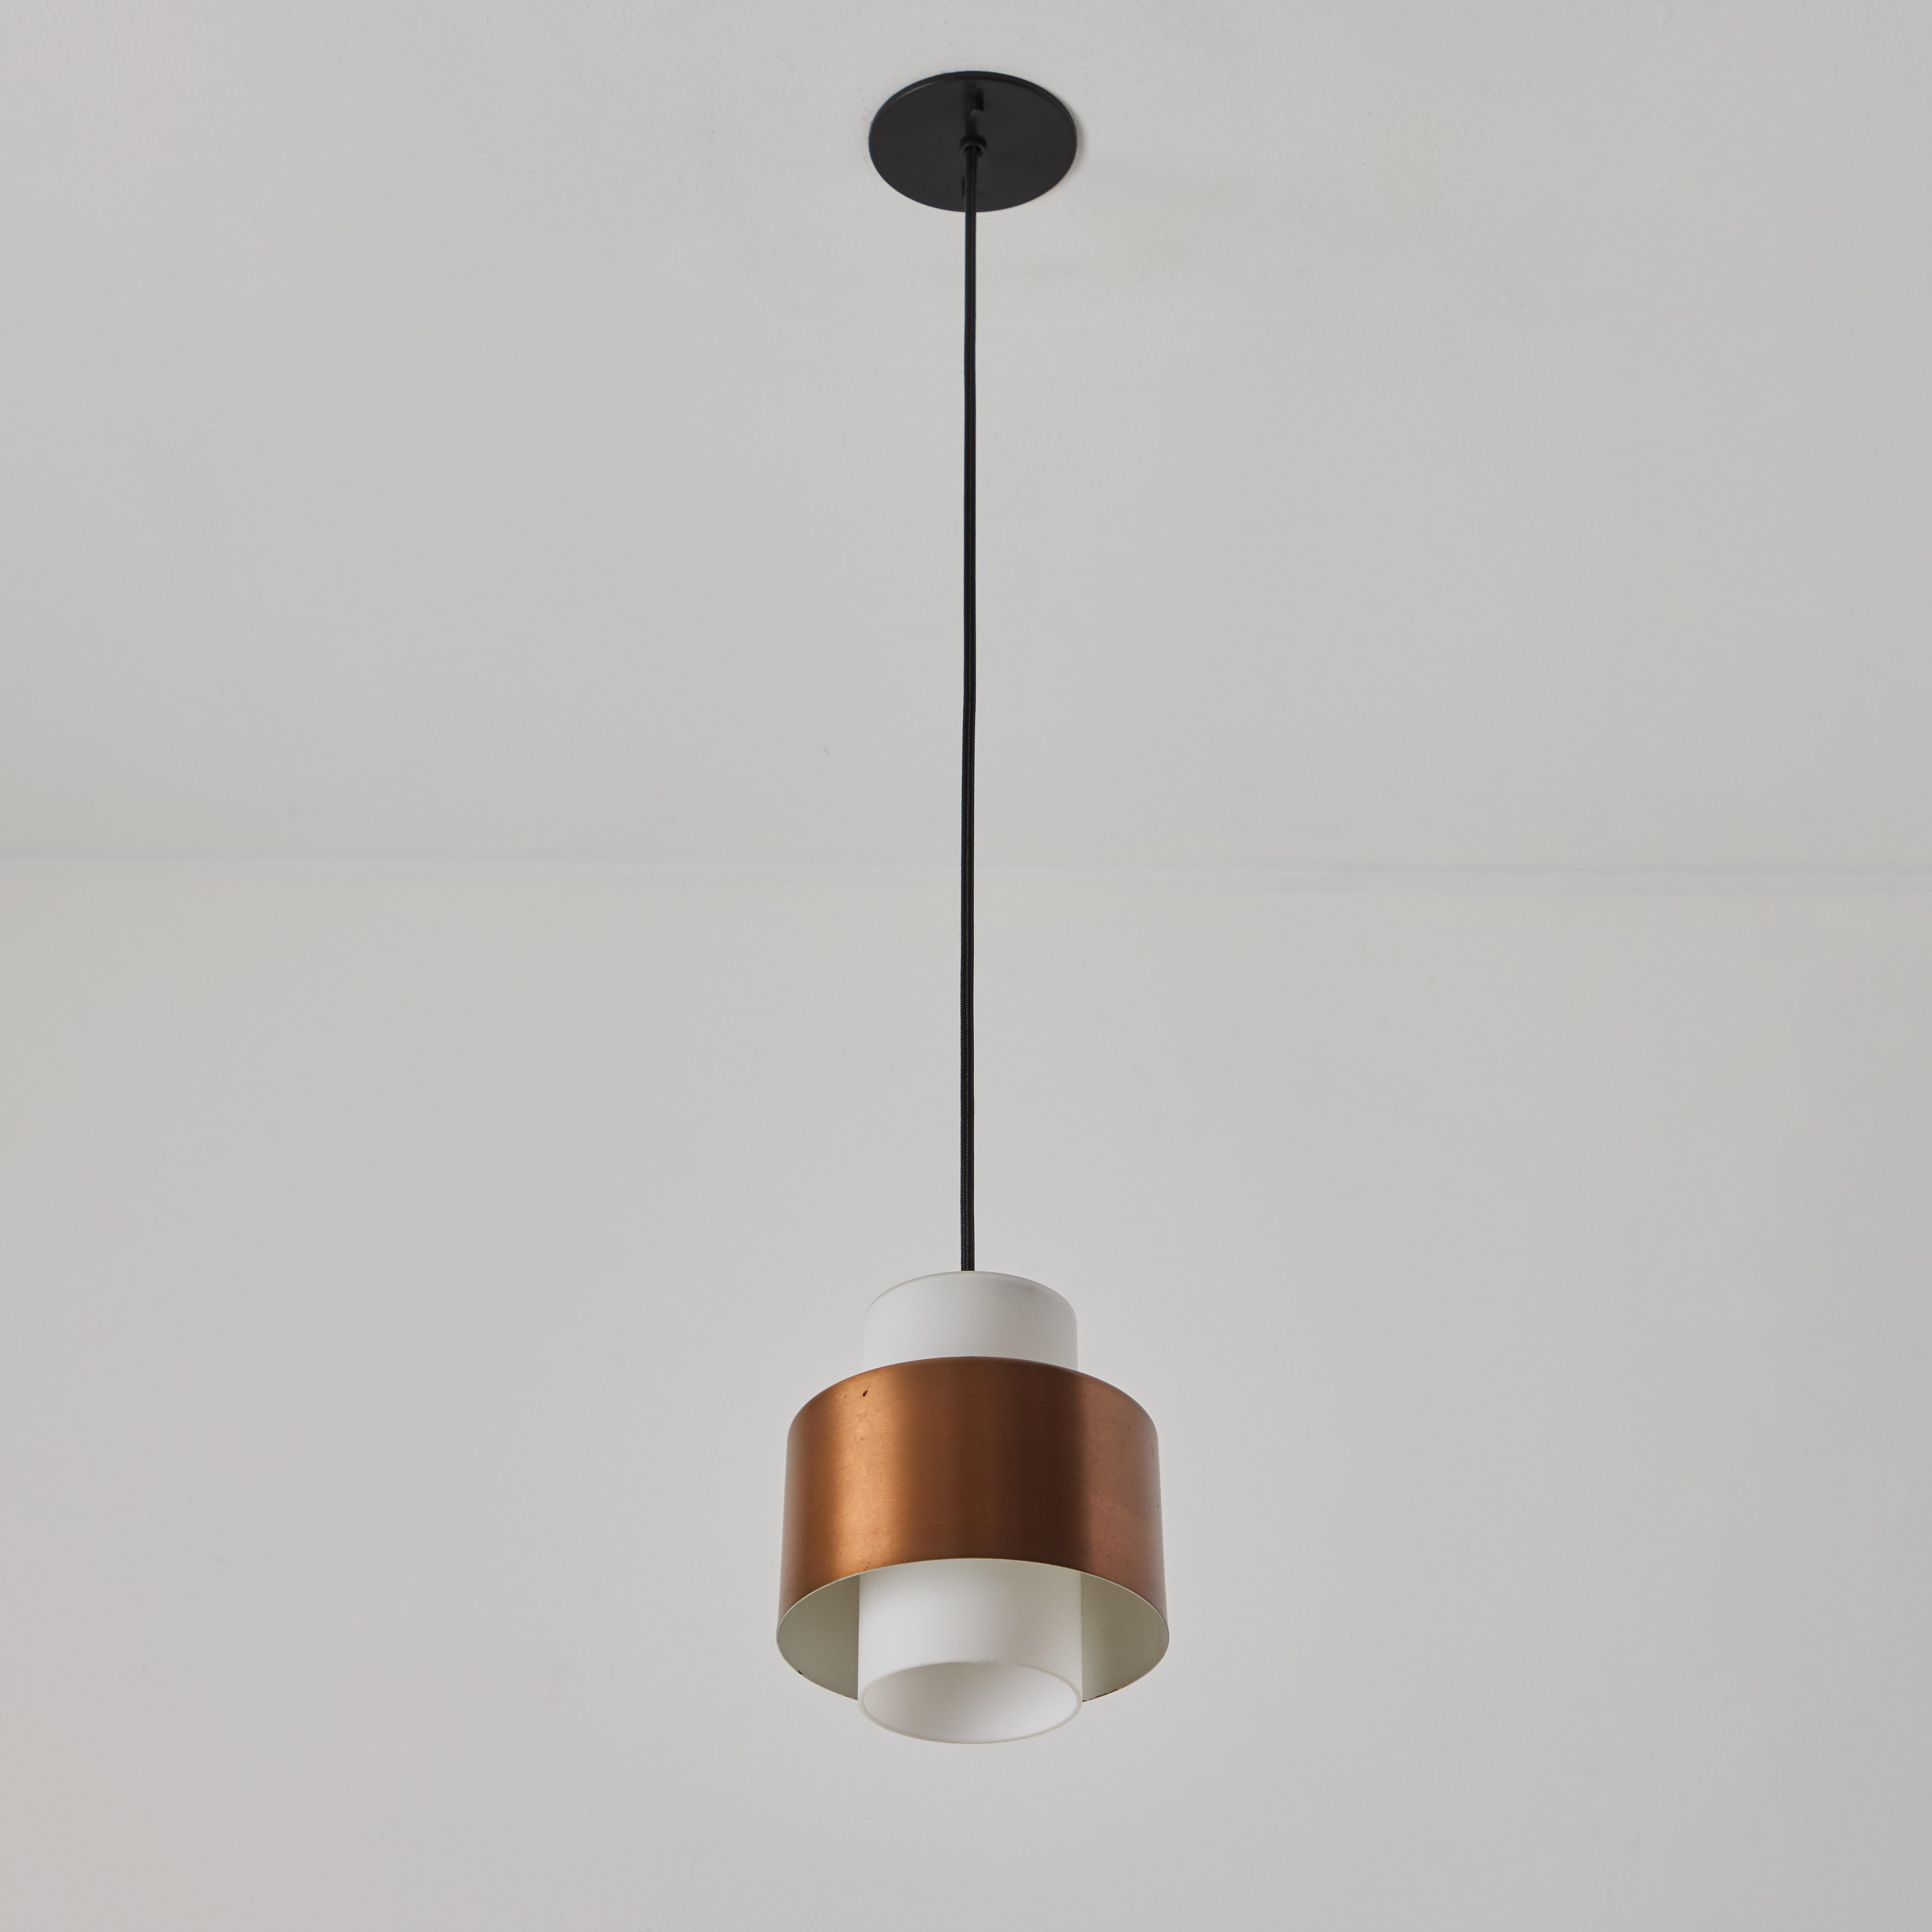 Mid-20th Century 1960s Opaline Glass & Copper Pendant Lamp Attributed to Stilnovo For Sale